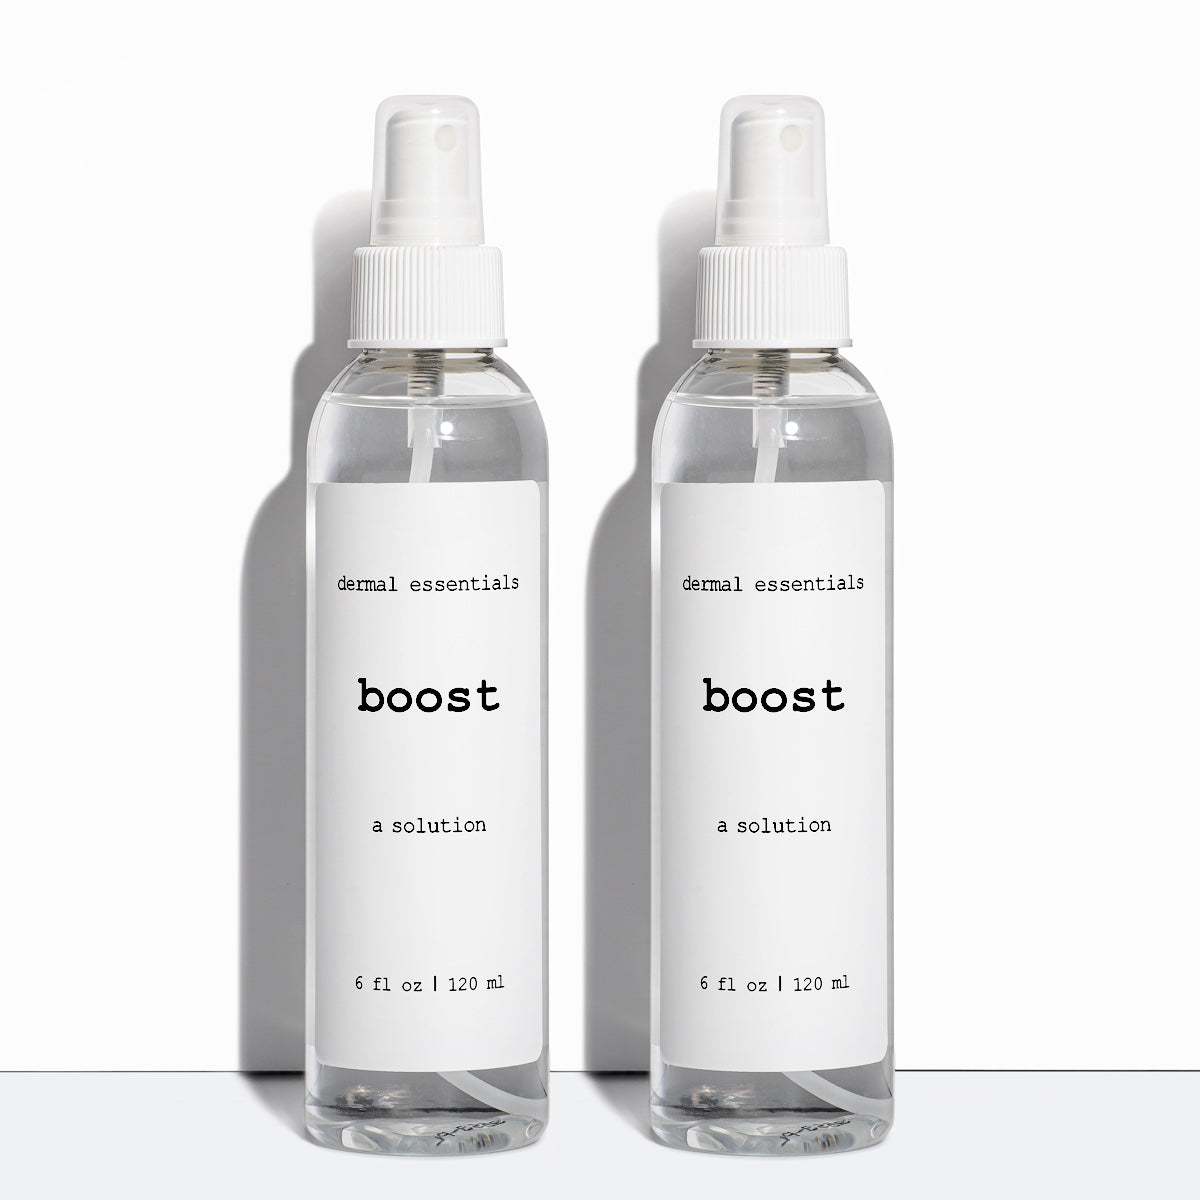 Two  Clear cylinder plastic bottles white label black letters white spray nozzle clear plastic lid 6 fl. oz. Boost calming facial spray Dermal Essentials Medical Grade Skincare  